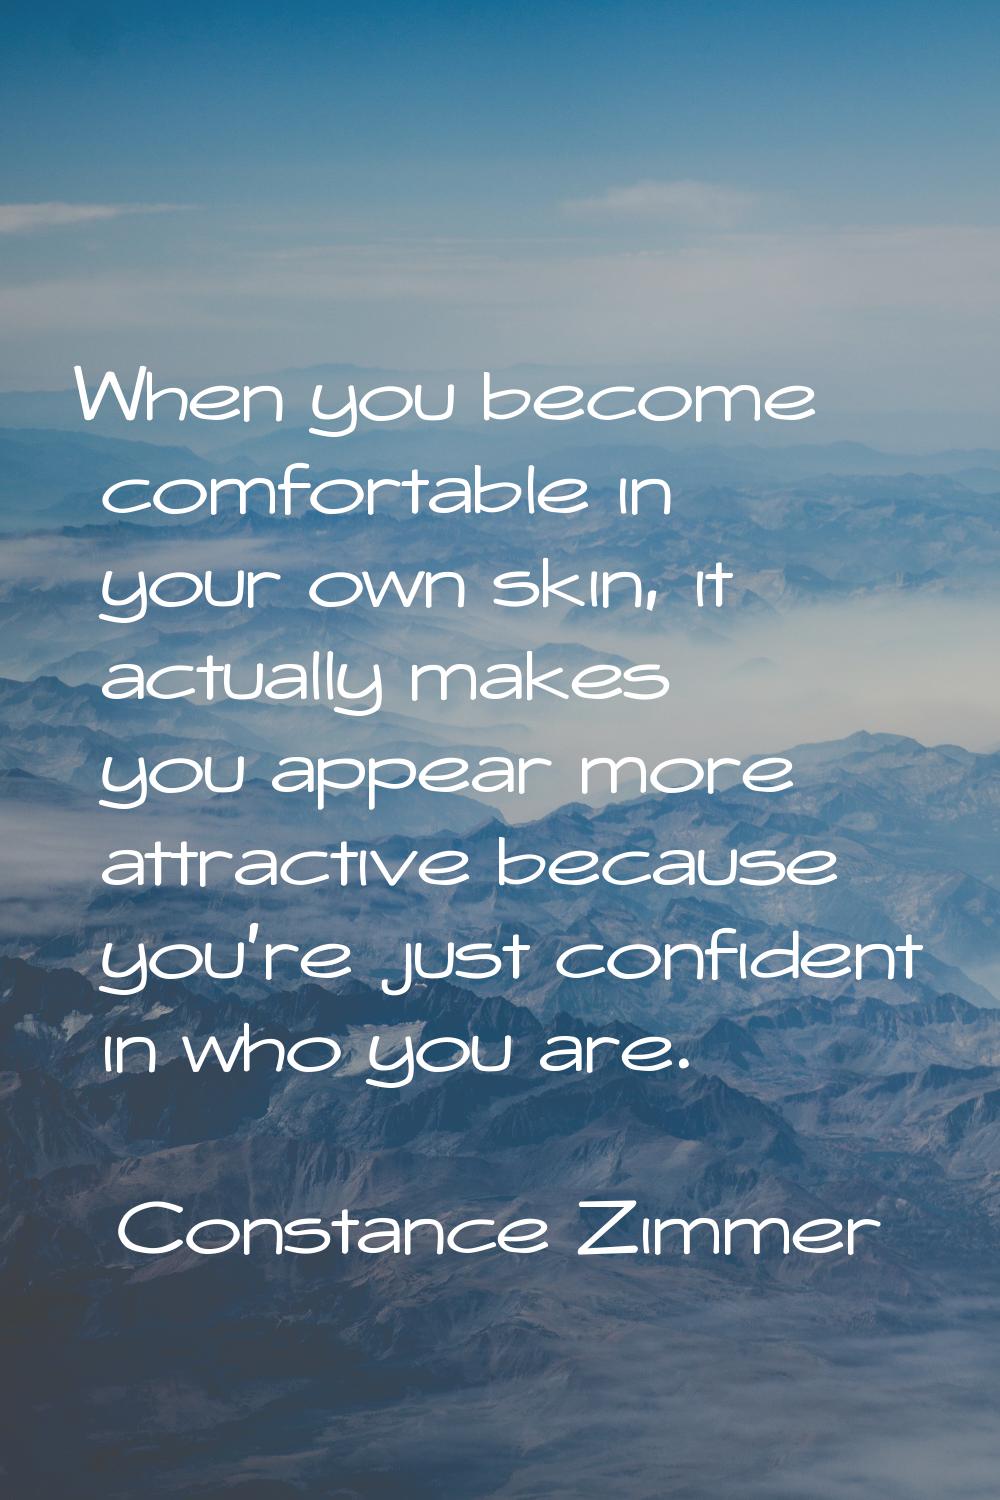 When you become comfortable in your own skin, it actually makes you appear more attractive because 